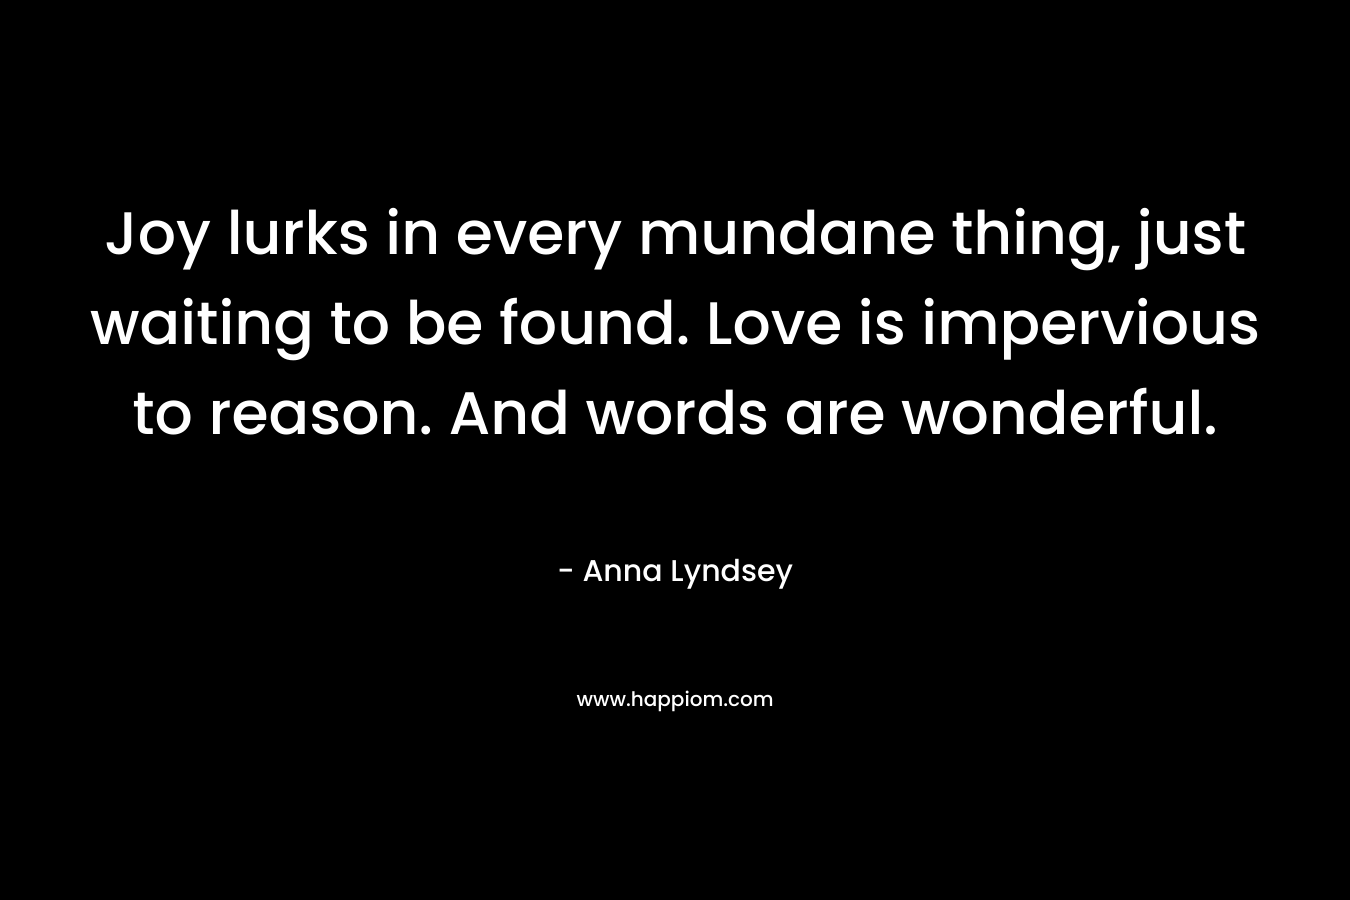 Joy lurks in every mundane thing, just waiting to be found. Love is impervious to reason. And words are wonderful. – Anna Lyndsey